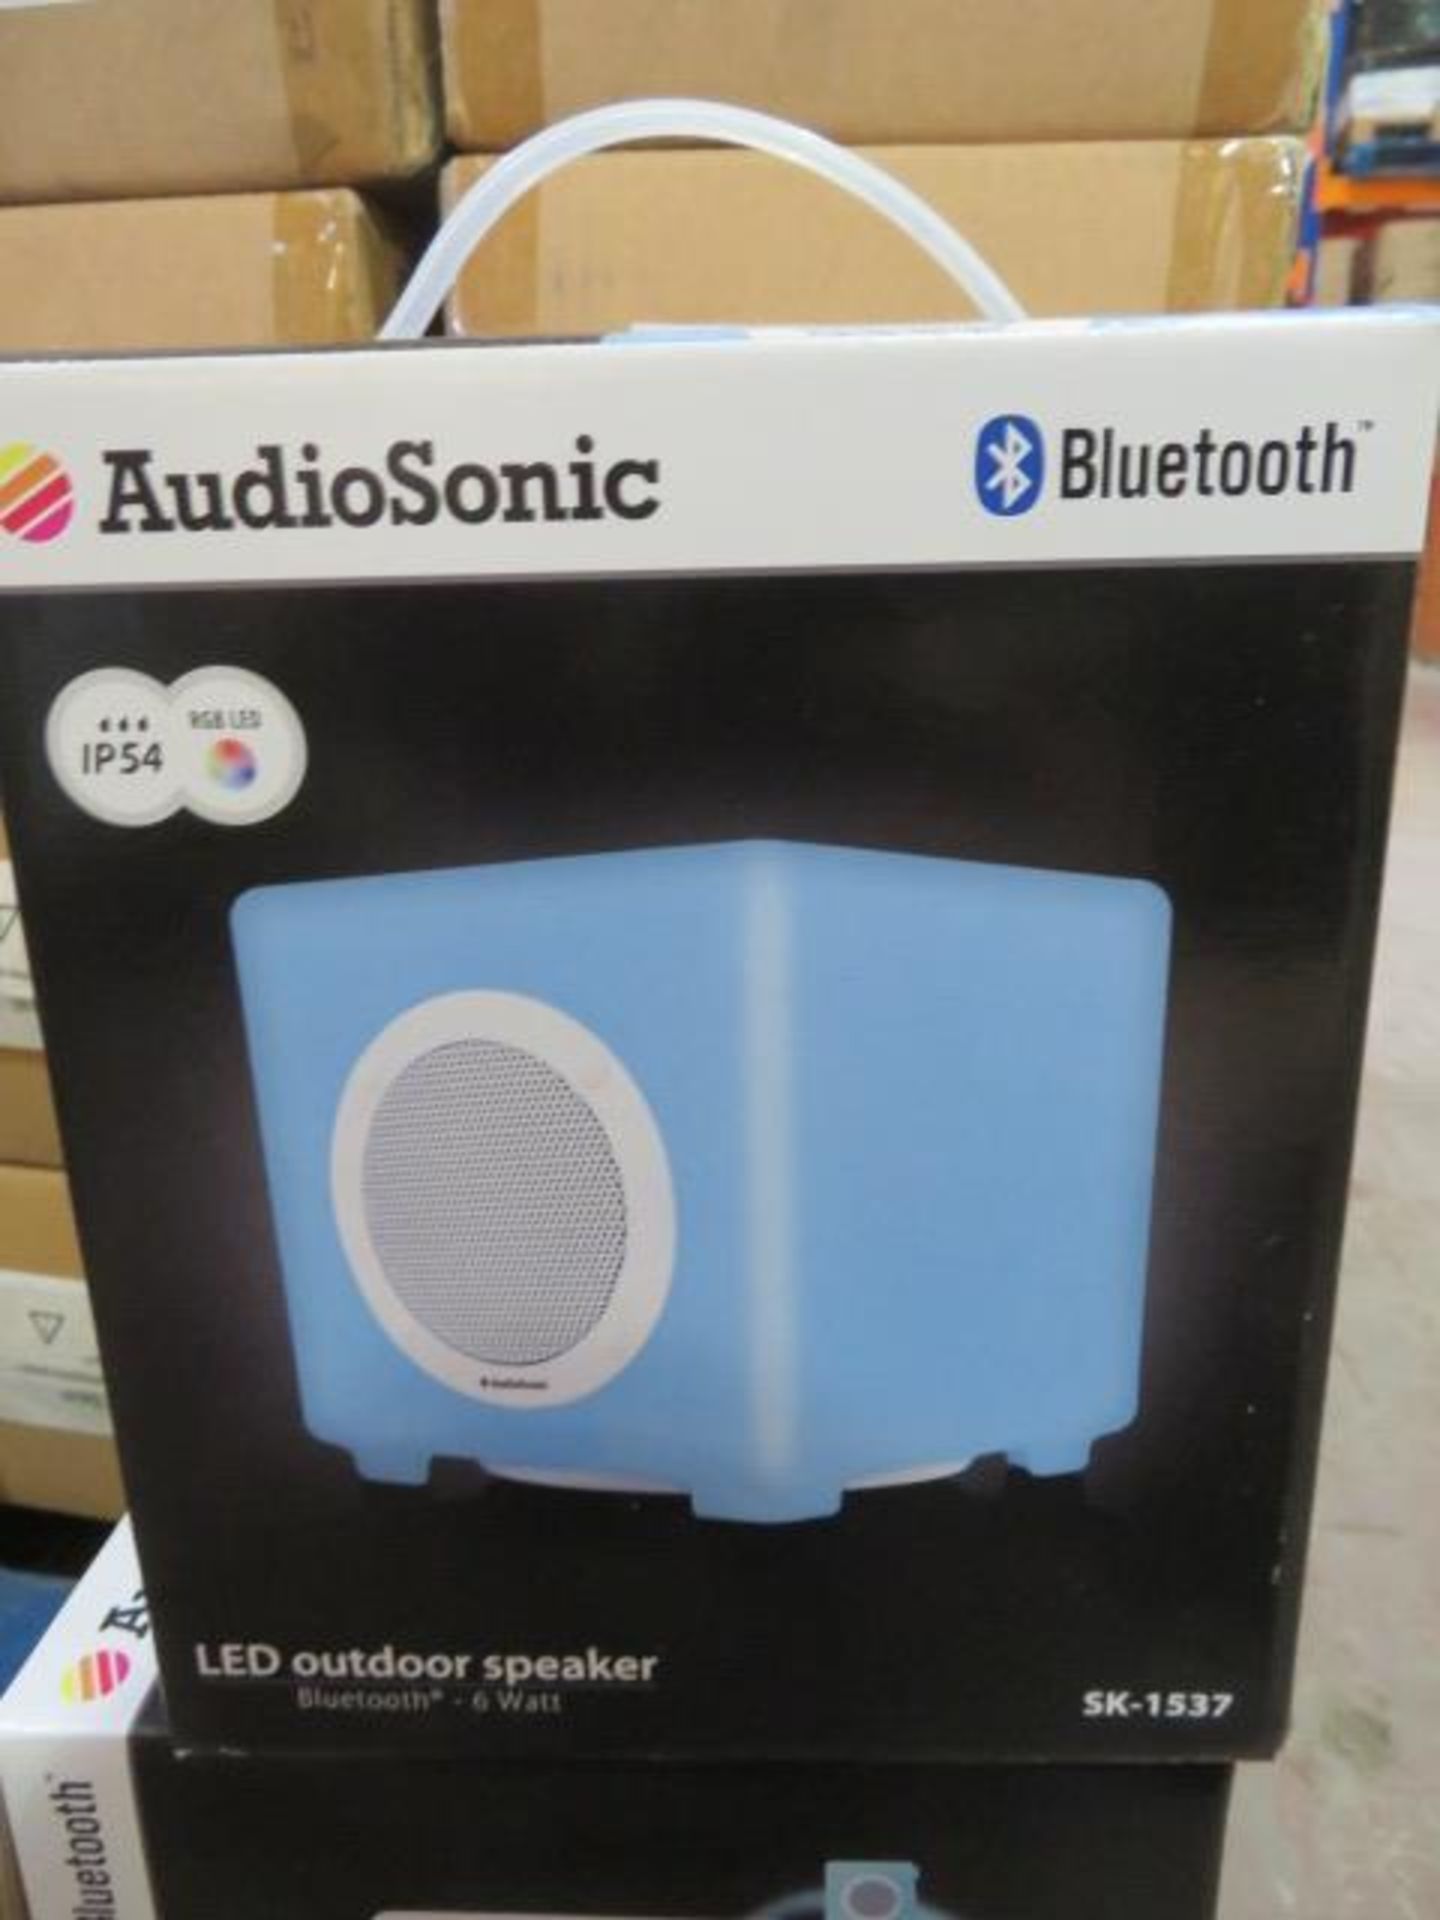 New & Boxed Audio Sonic Bluetooth Sk1537 Outdoor Led Colour Changing Speaker. 6 Watt.